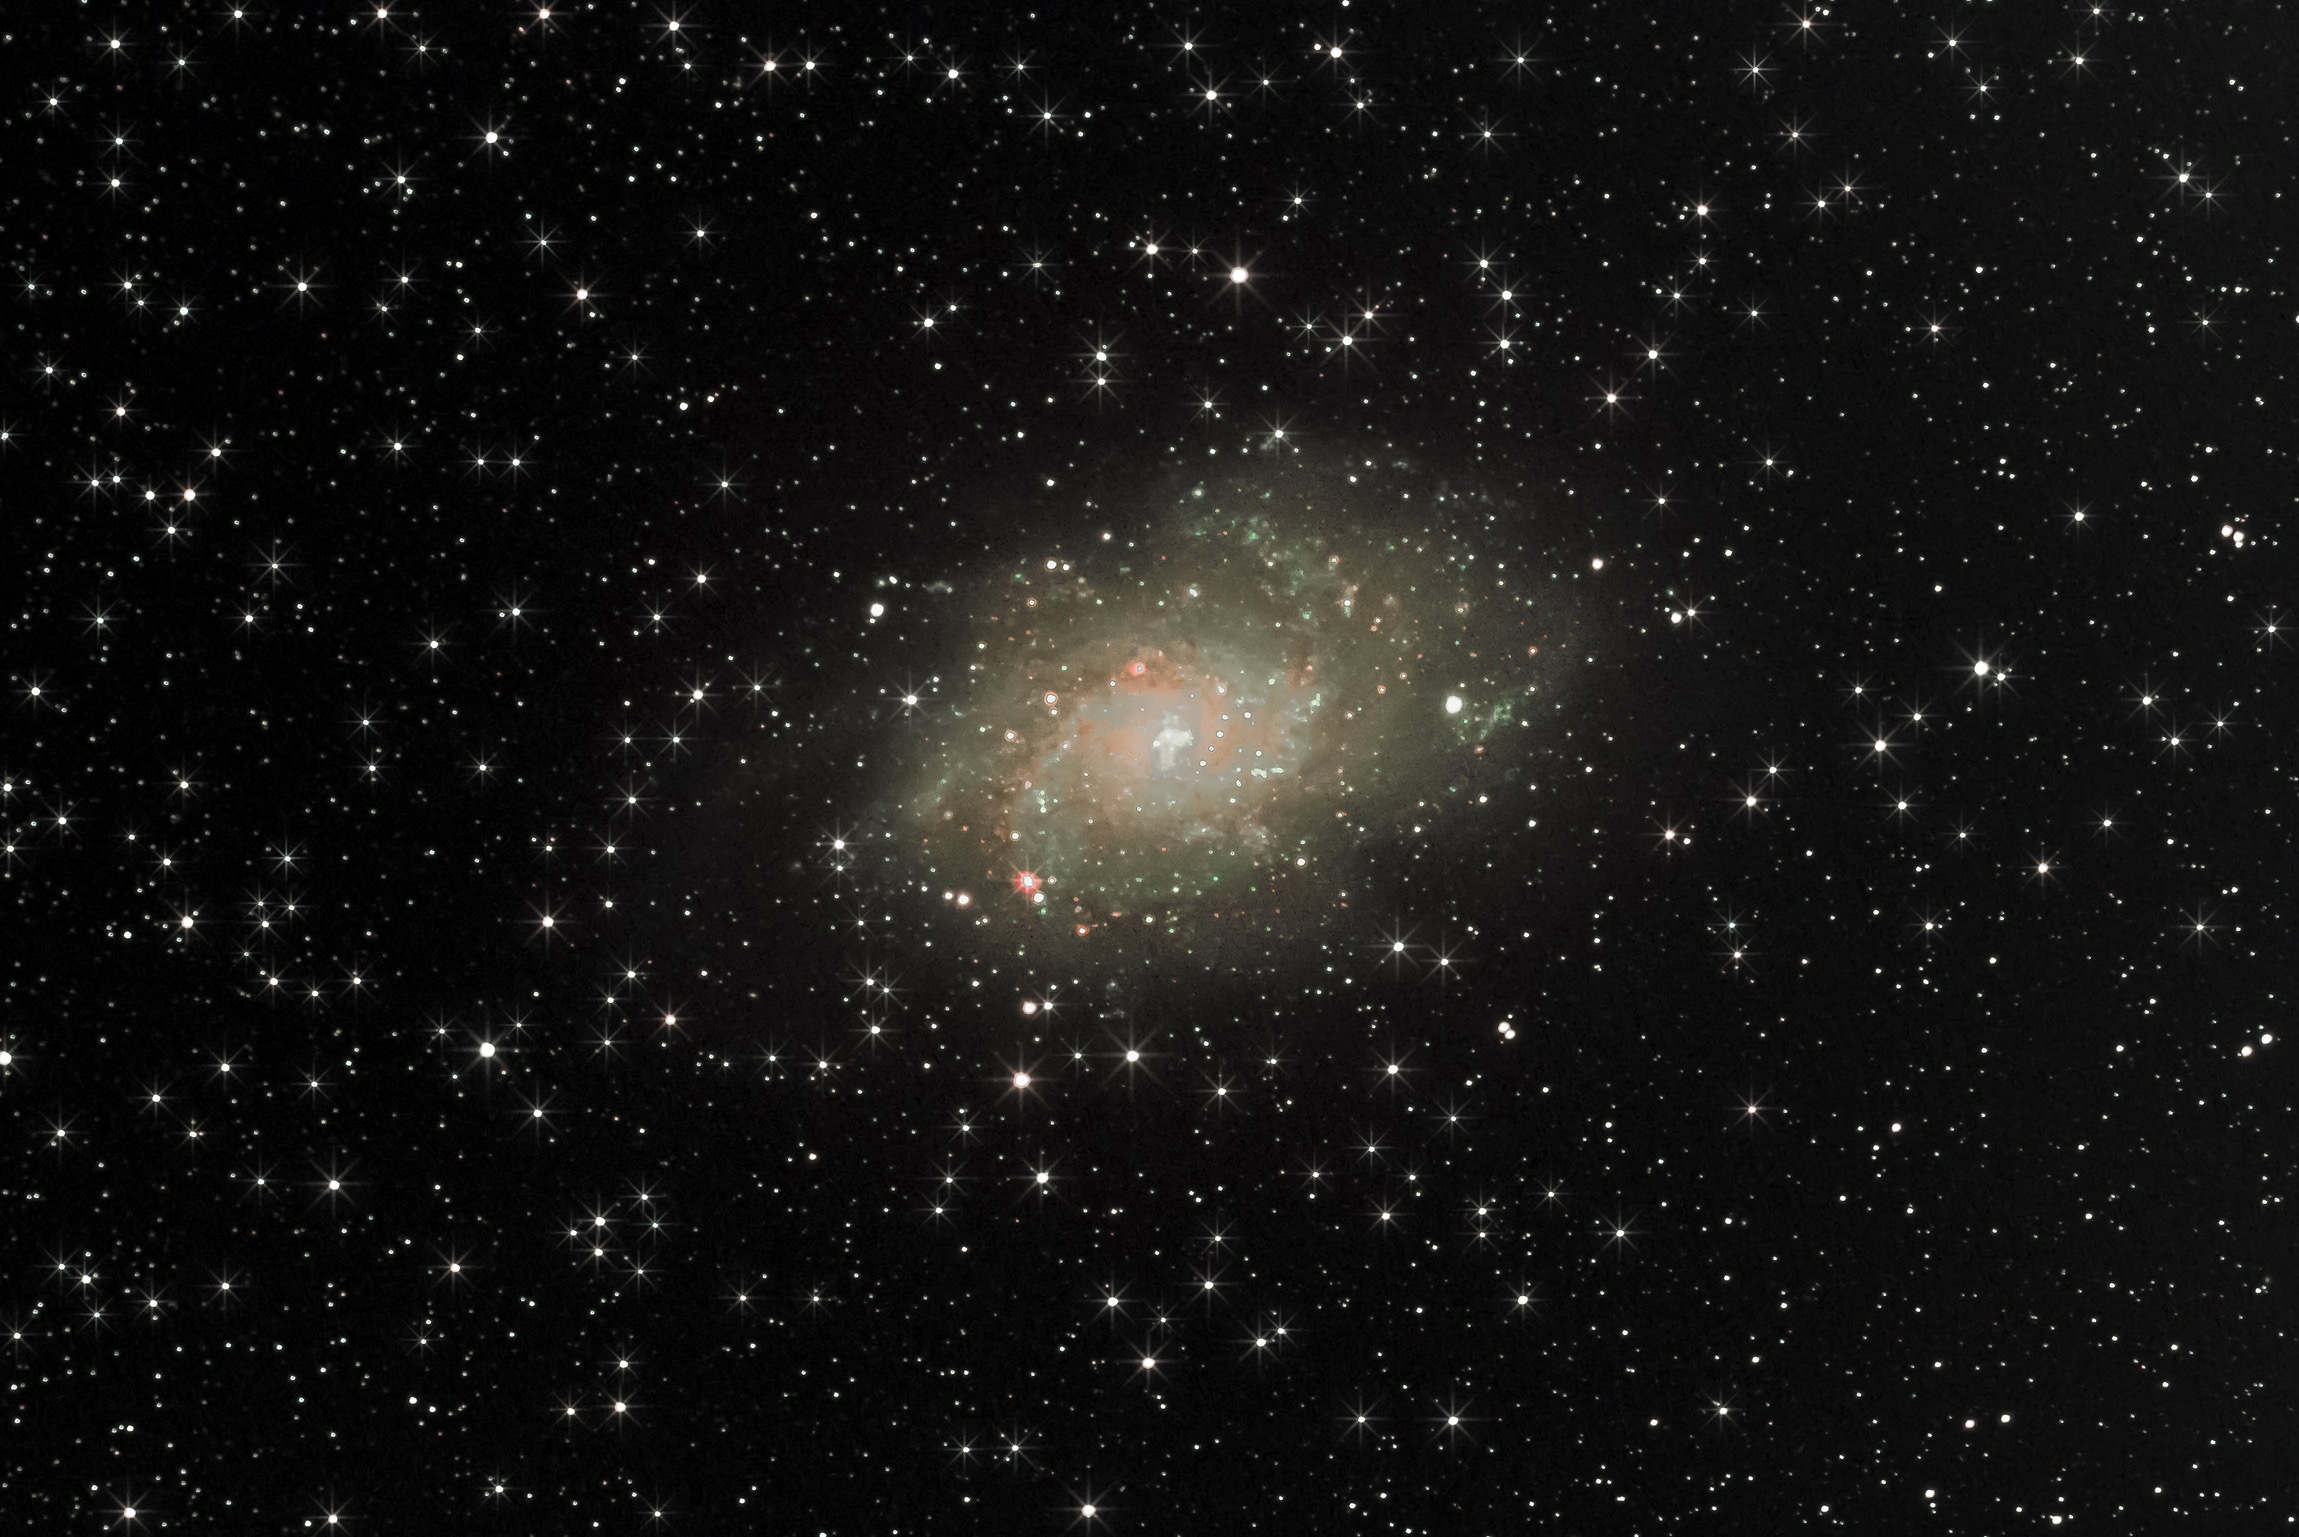 The Triangulum Galaxy is a spiral galaxy 2.73 million light-years from Earth in the constellation Triangulum. It is catalogued as Messier 33 or NGC (New General Catalogue) 598. With the D25 isophotal diameter of 18.74 kiloparsecs (61,100 light-years), the Triangulum Galaxy is the third-largest member of the Local Group of galaxies, behind the Andromeda Galaxy and the Milky Way.